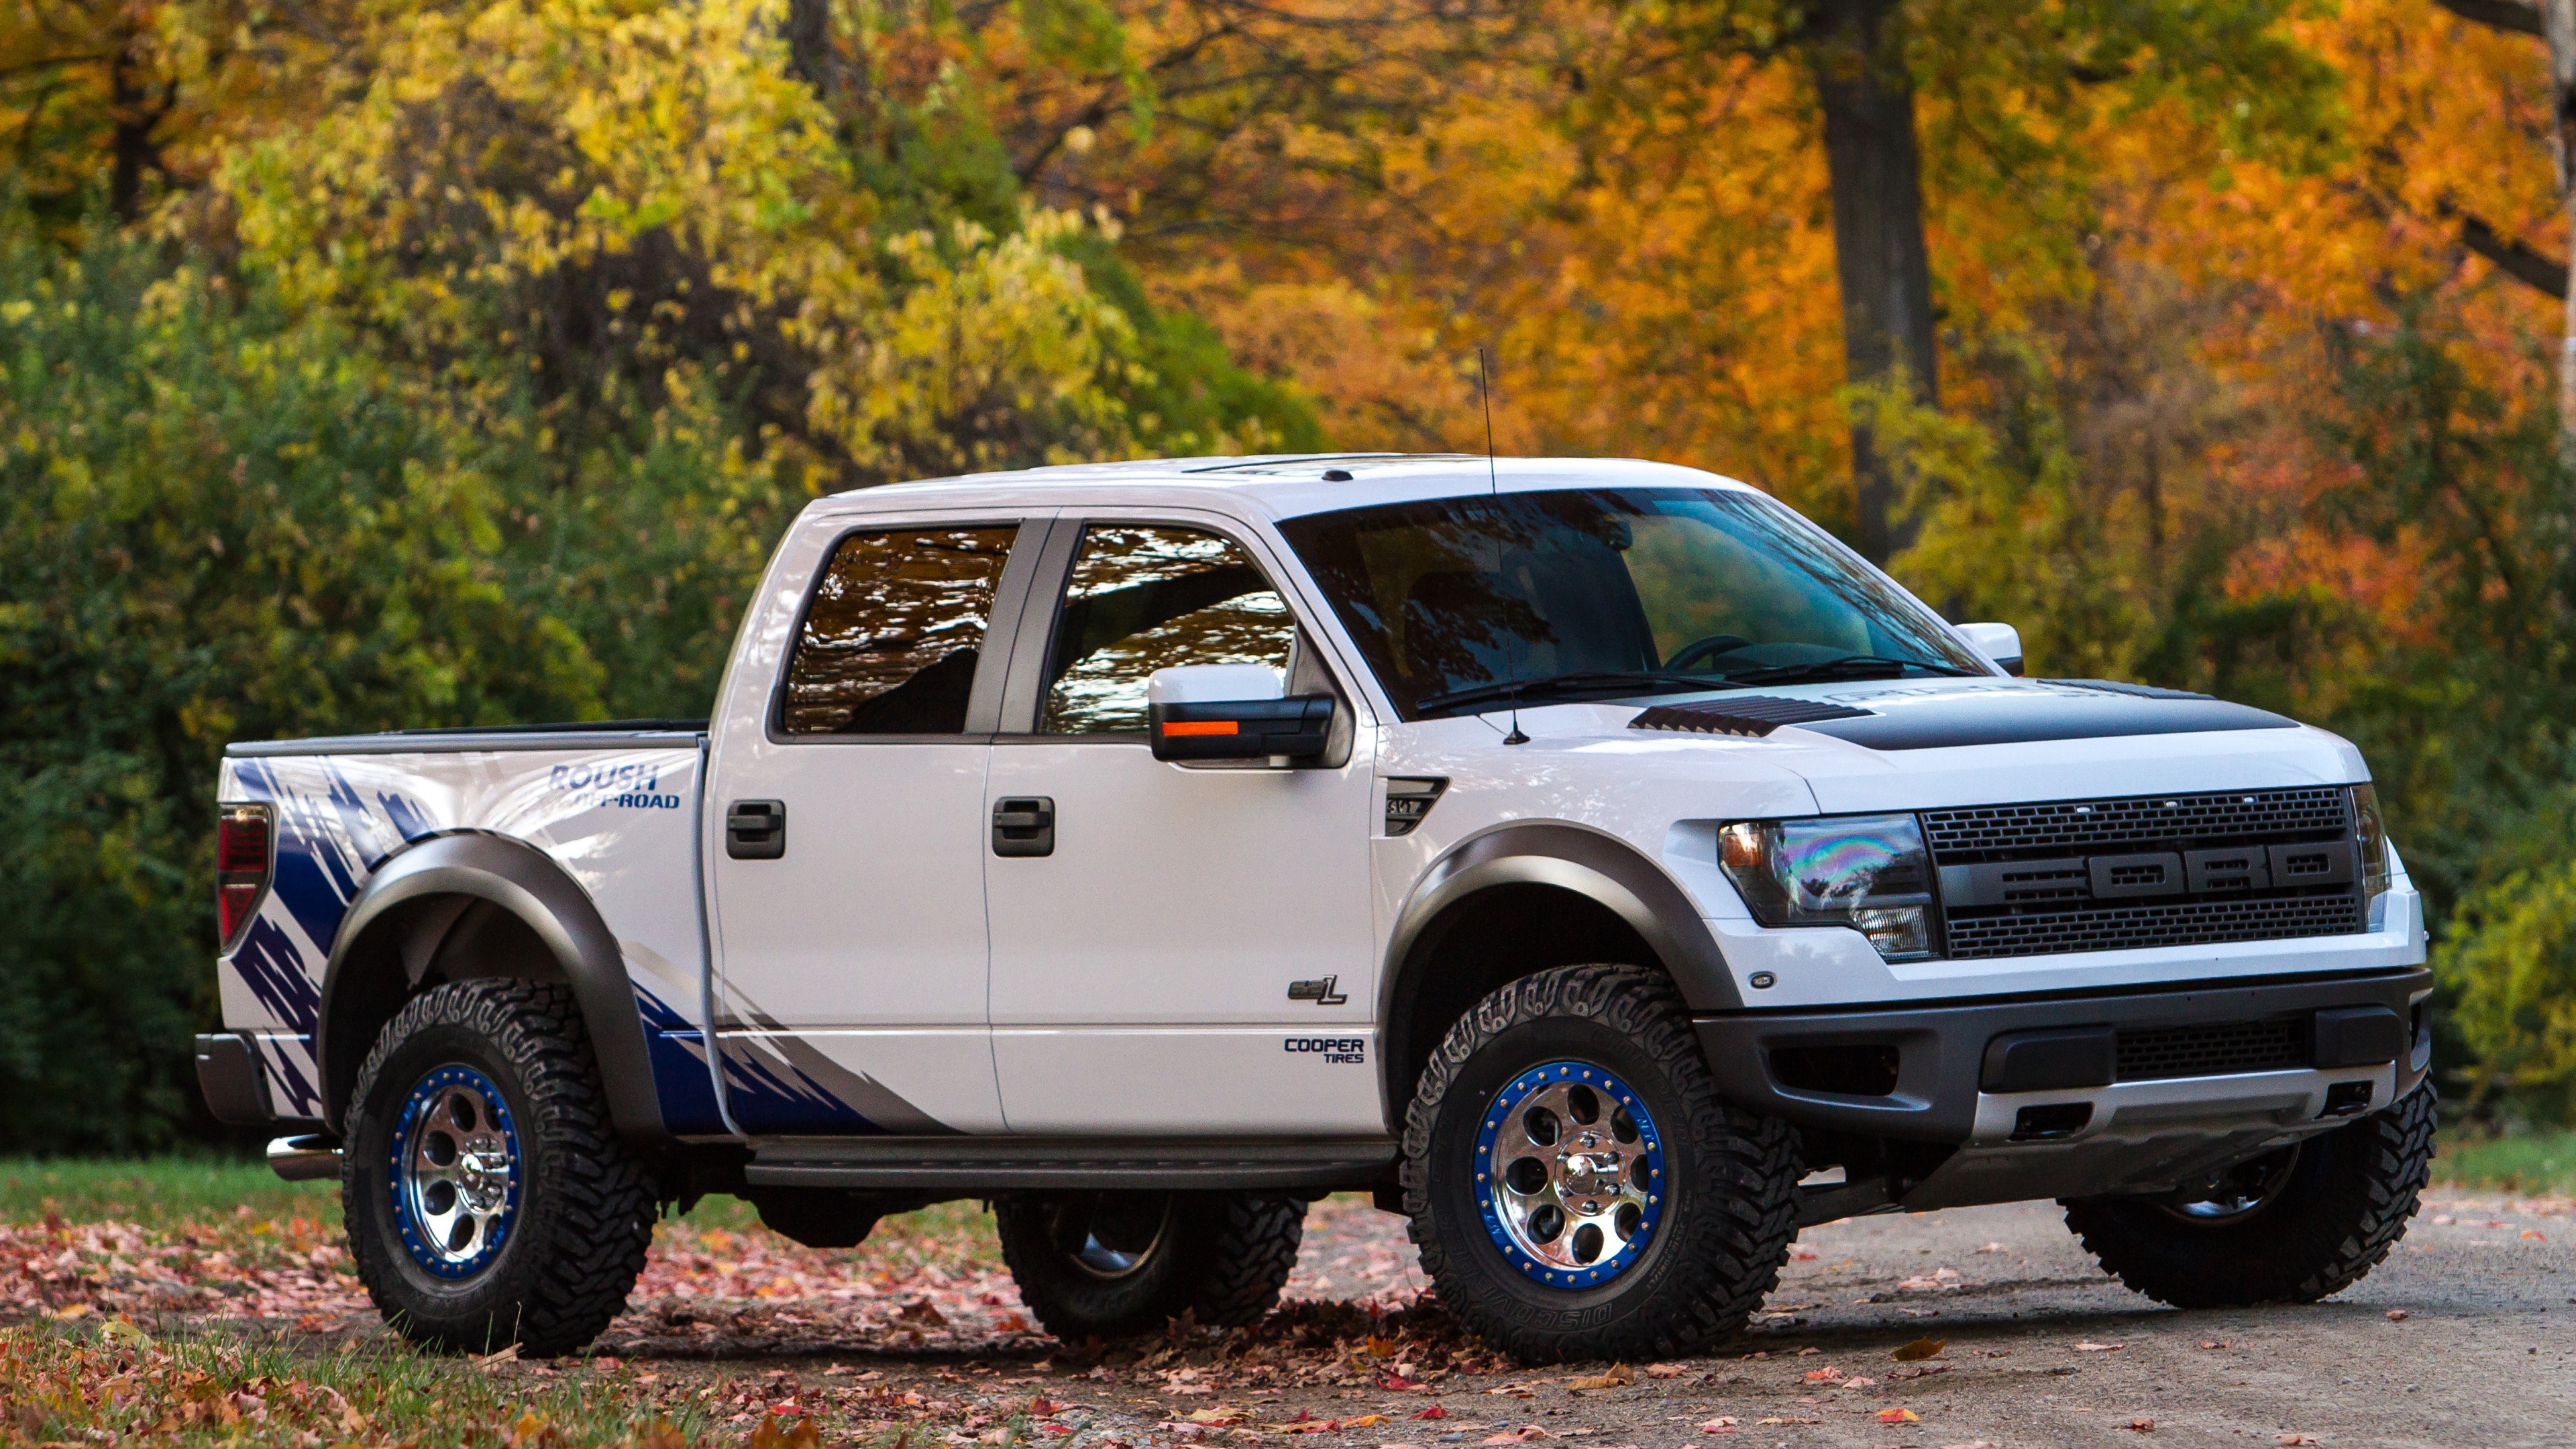 vehicles, ford raptor, jeep, off road, ford images